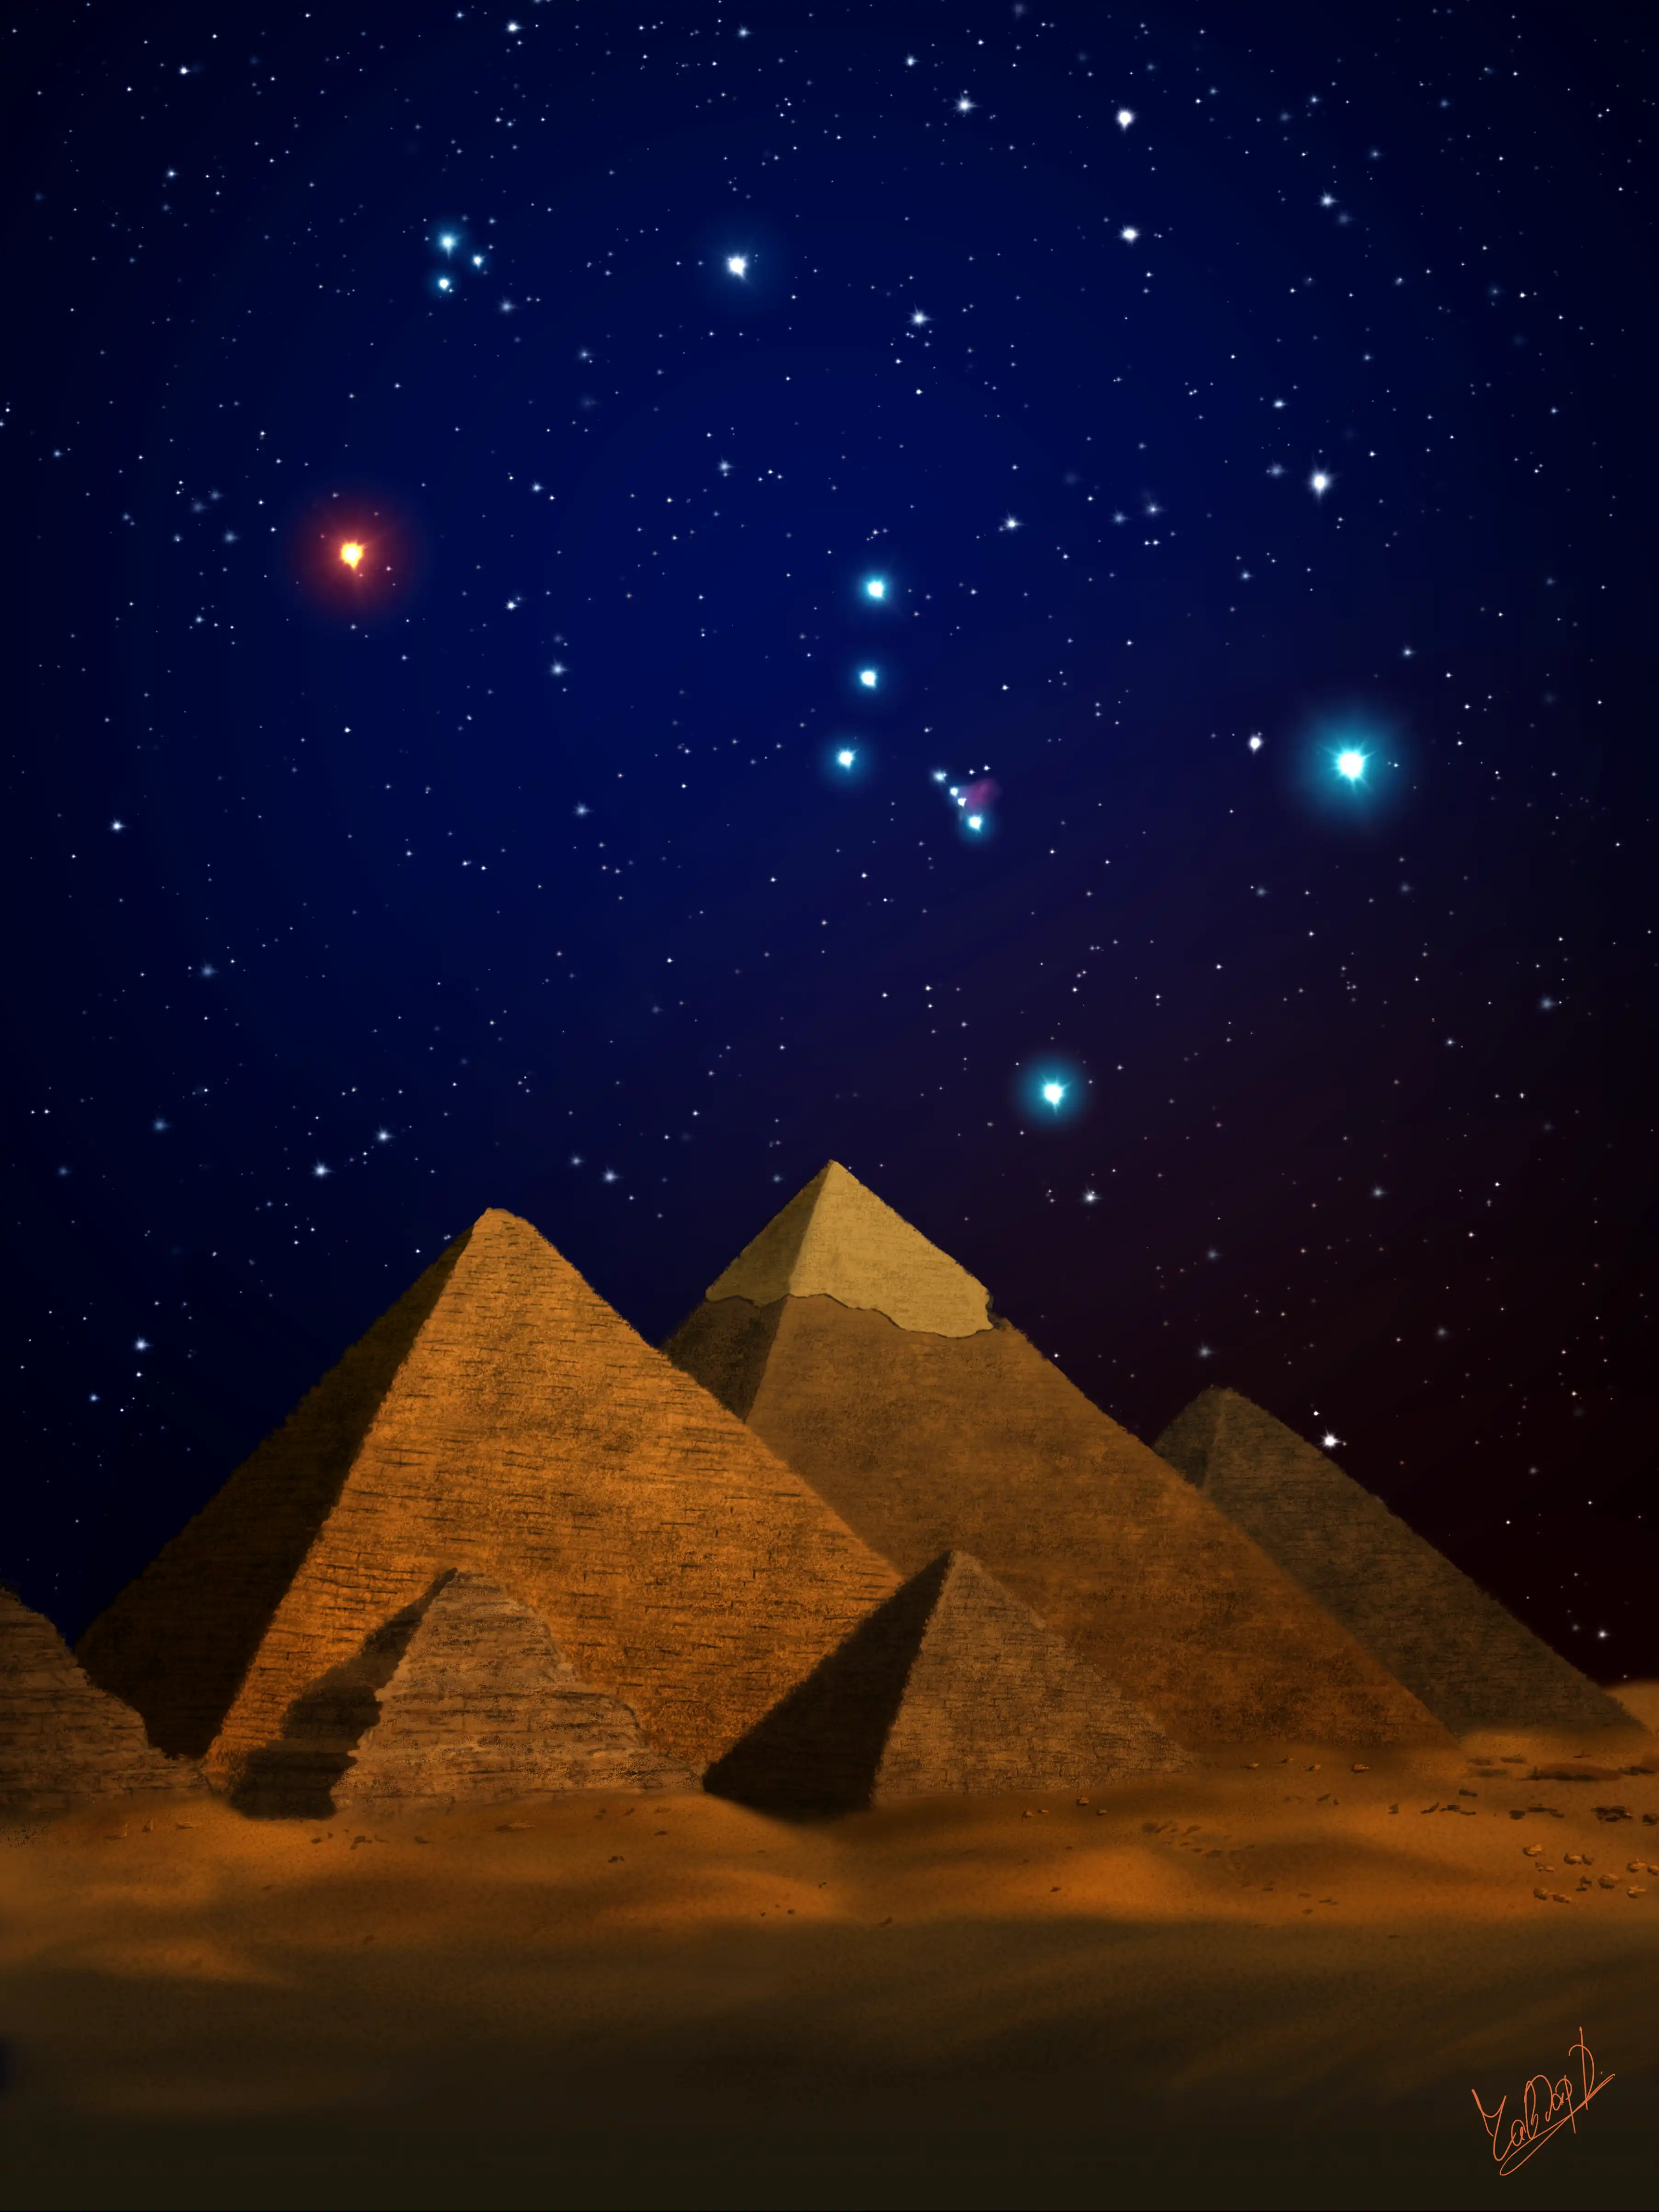 Orion the hunter rising over the Great Pyramides